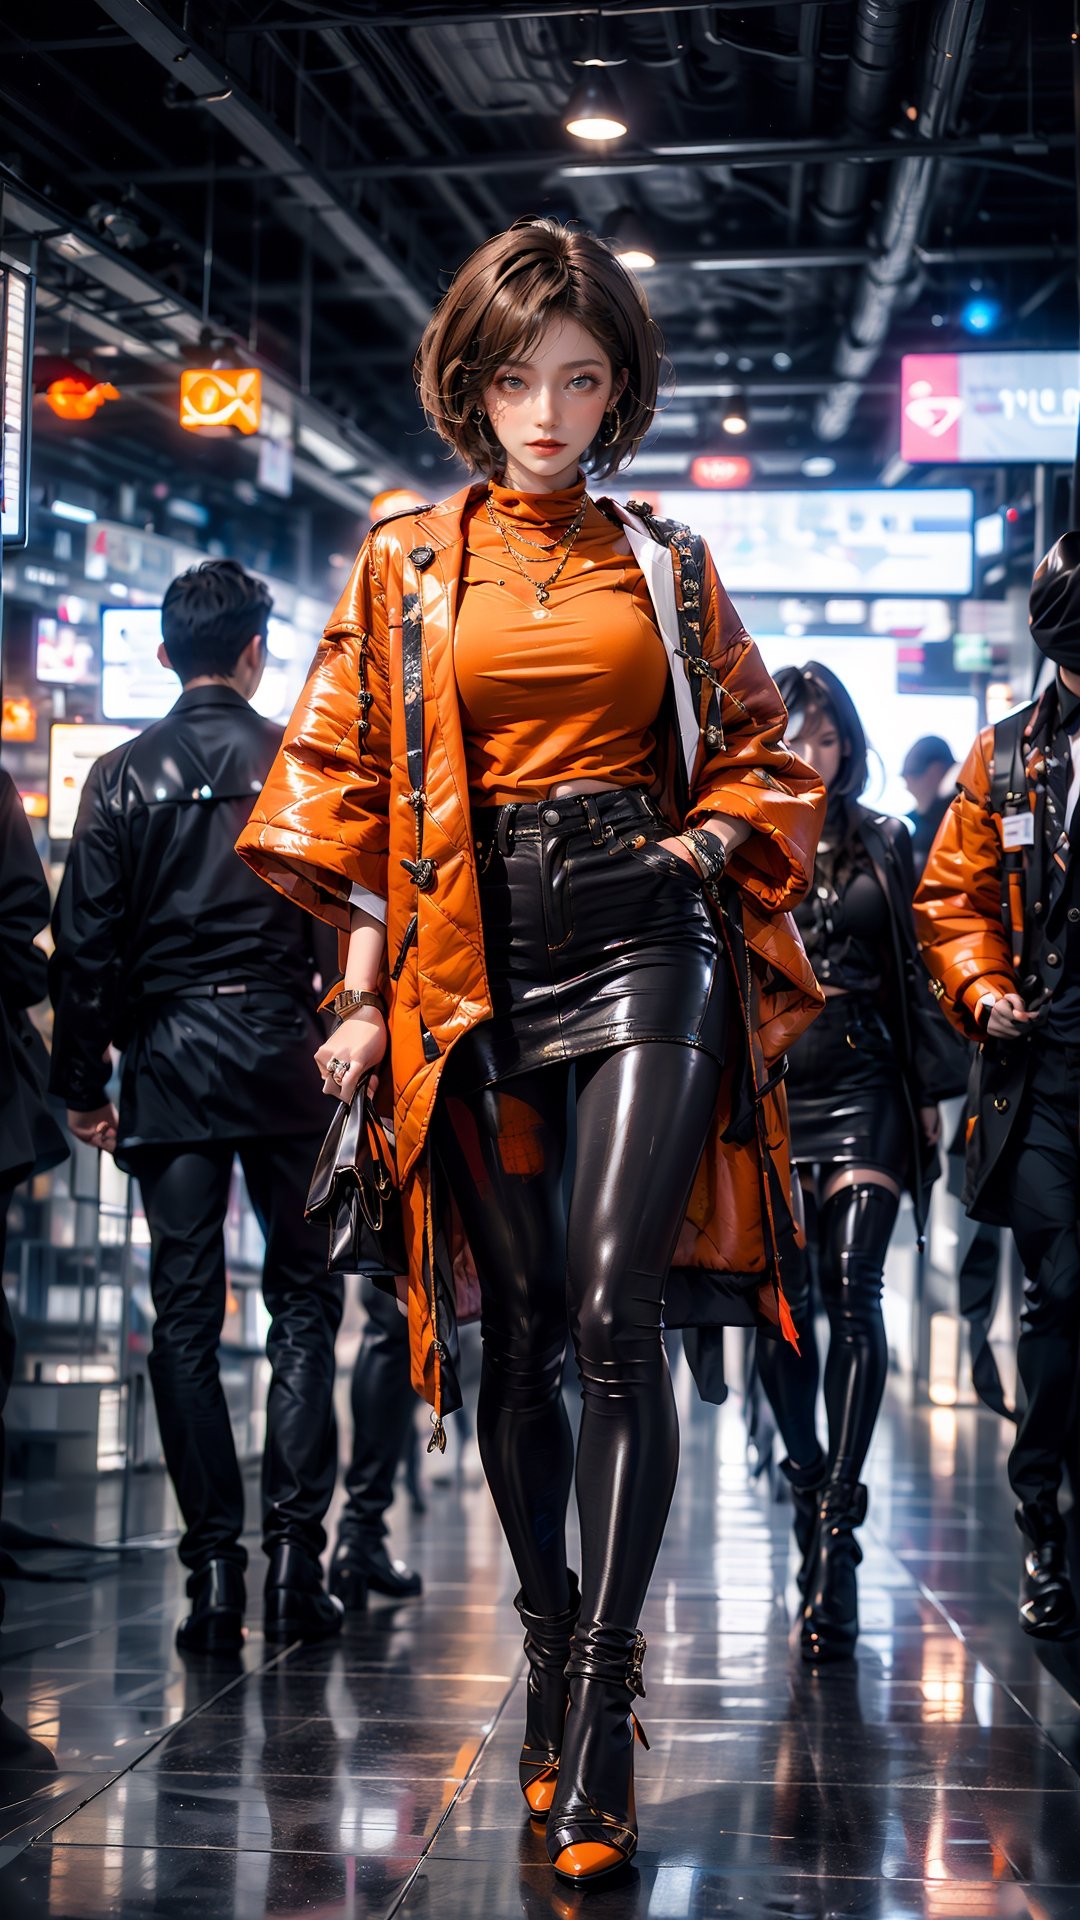 masterpiece,High definition,high resolution,best quality,glossy and clean skin,natural skin texture,soft light,girl focus,short hair,Orange dyed hair,High detailed ,more detail,luxurious fur coat,high heels,full body shot,midjourney,Robocap